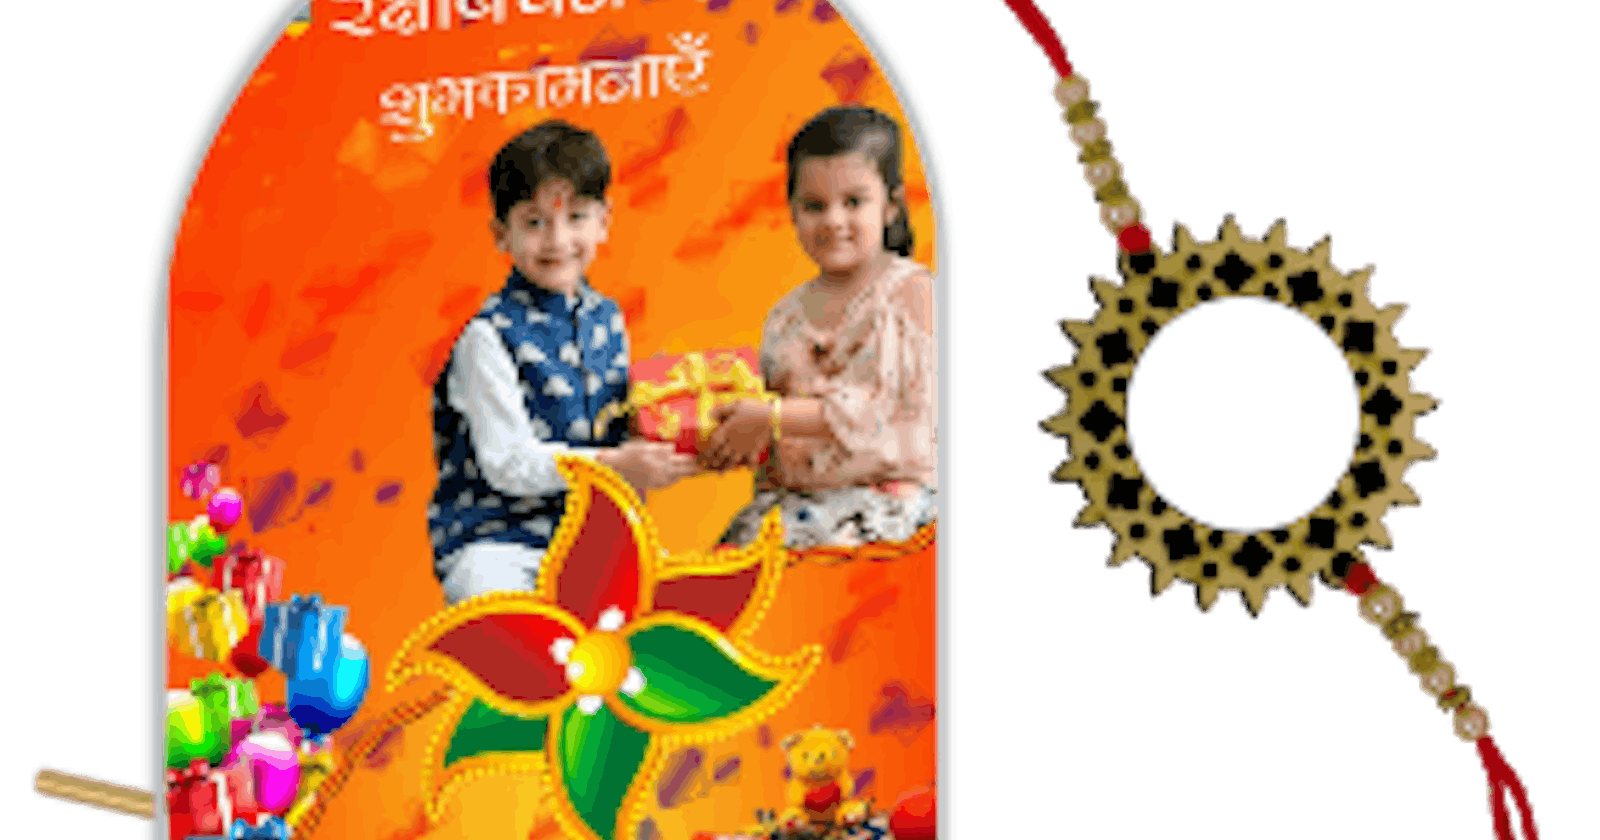 What makes Rakhi Personalized gifts so special?